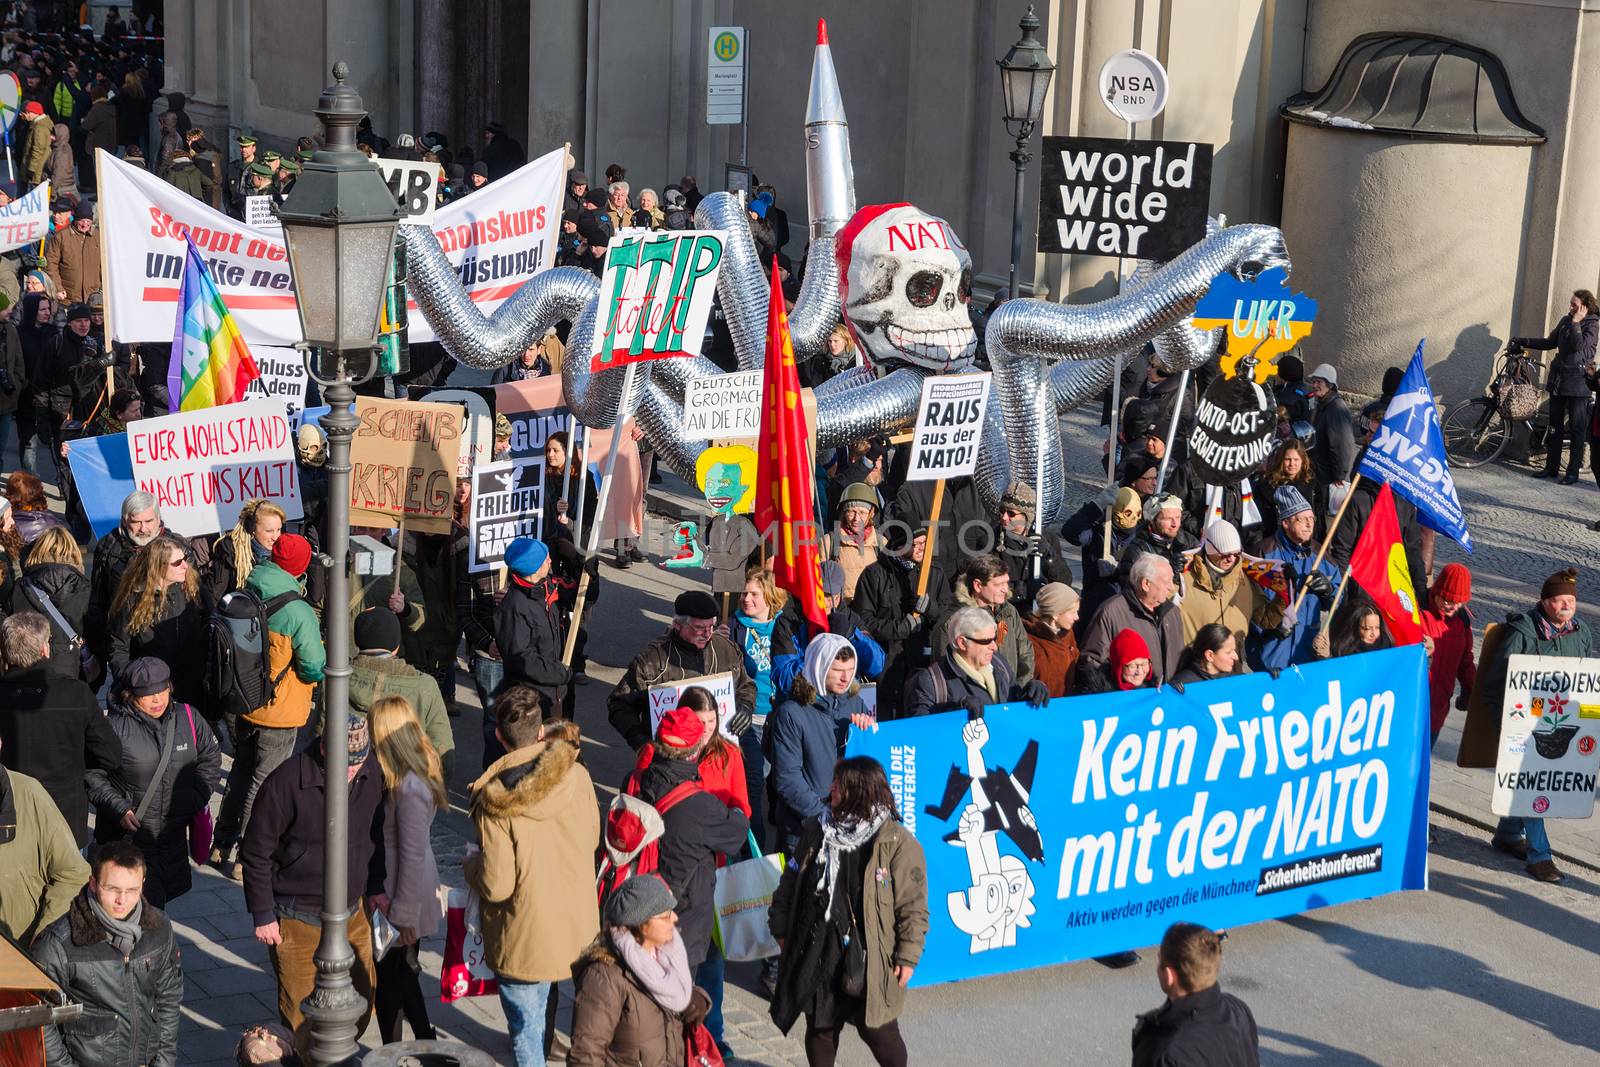 Munich, Germany - February 7, 2015: NATO in Europe like an octopus. Peaceful demonstration anti-NATO pacific protest rally. Text on the banner reads as "No friendship with NATO"